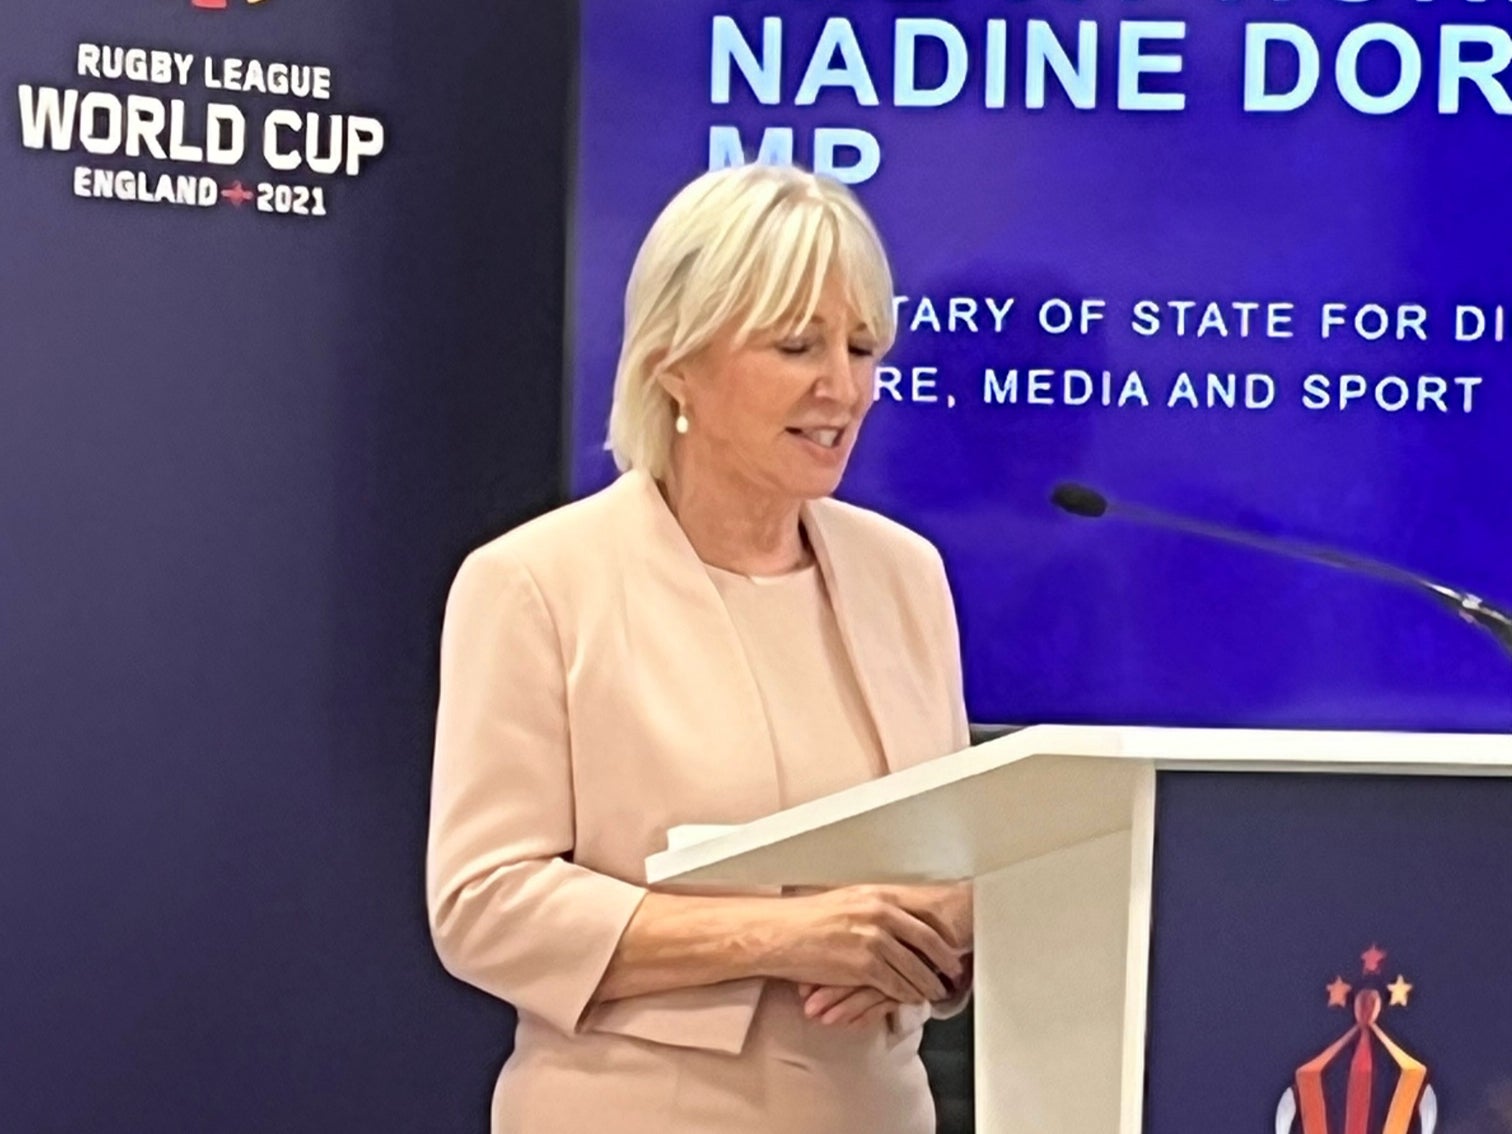 Nadine Dorries speaks at the Rugby League World Cup event in St Helens